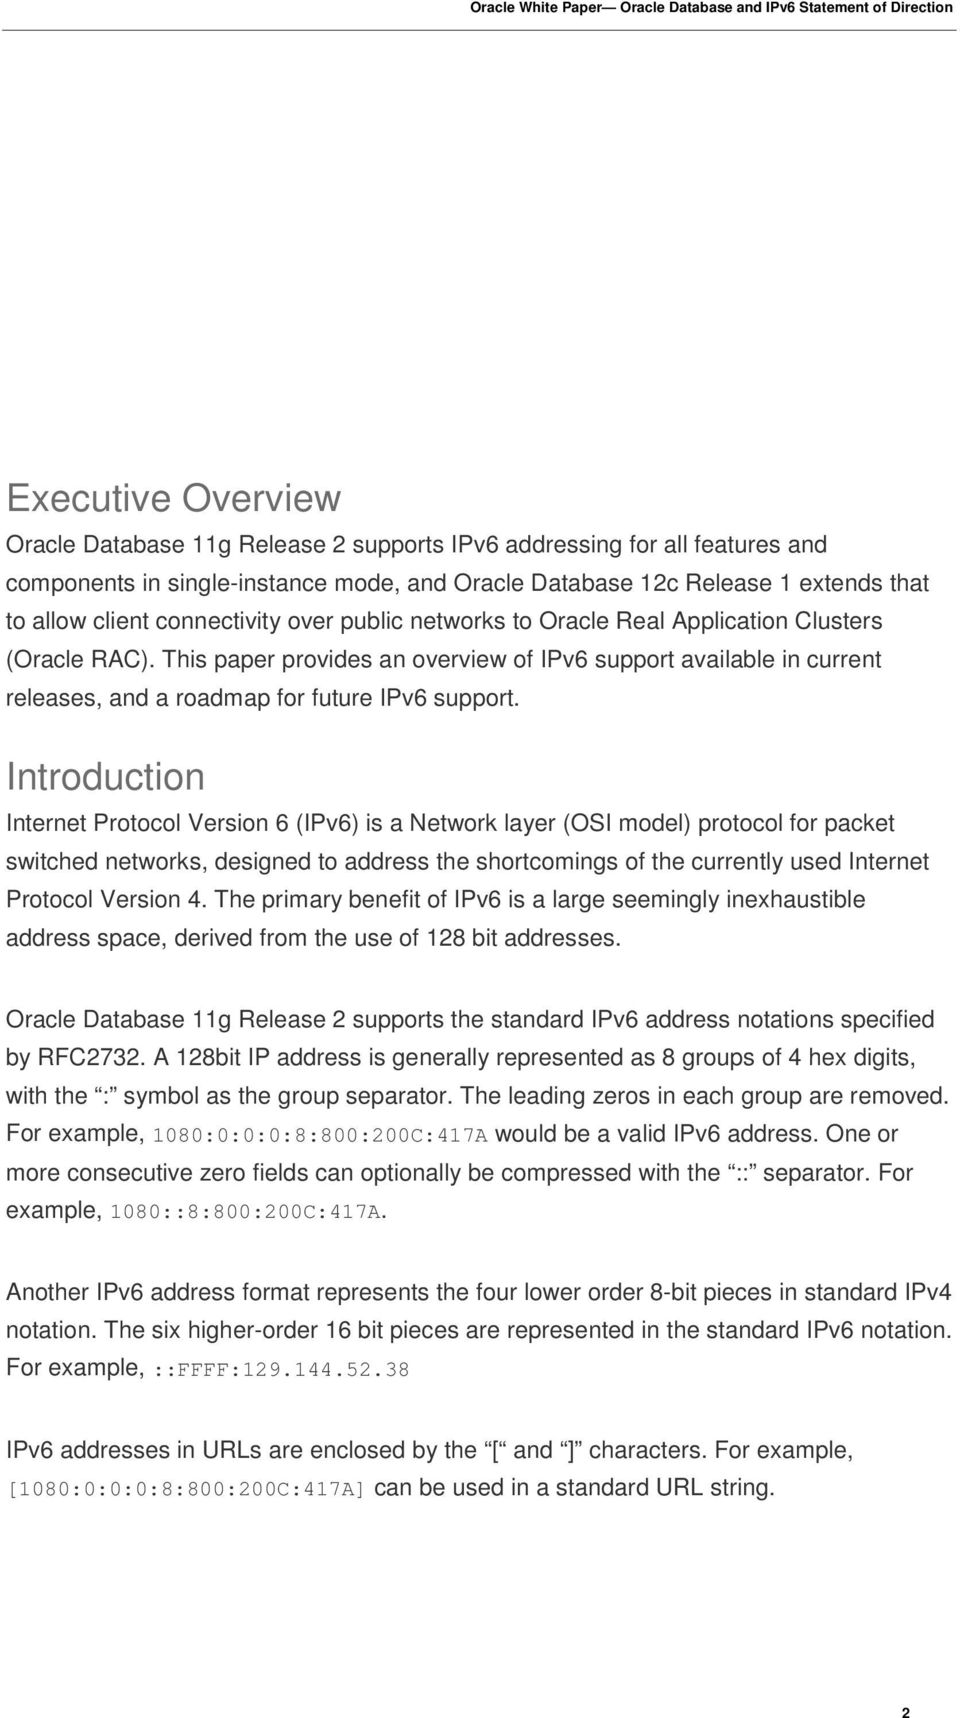 This paper provides an overview of IPv6 support available in current releases, and a roadmap for future IPv6 support.